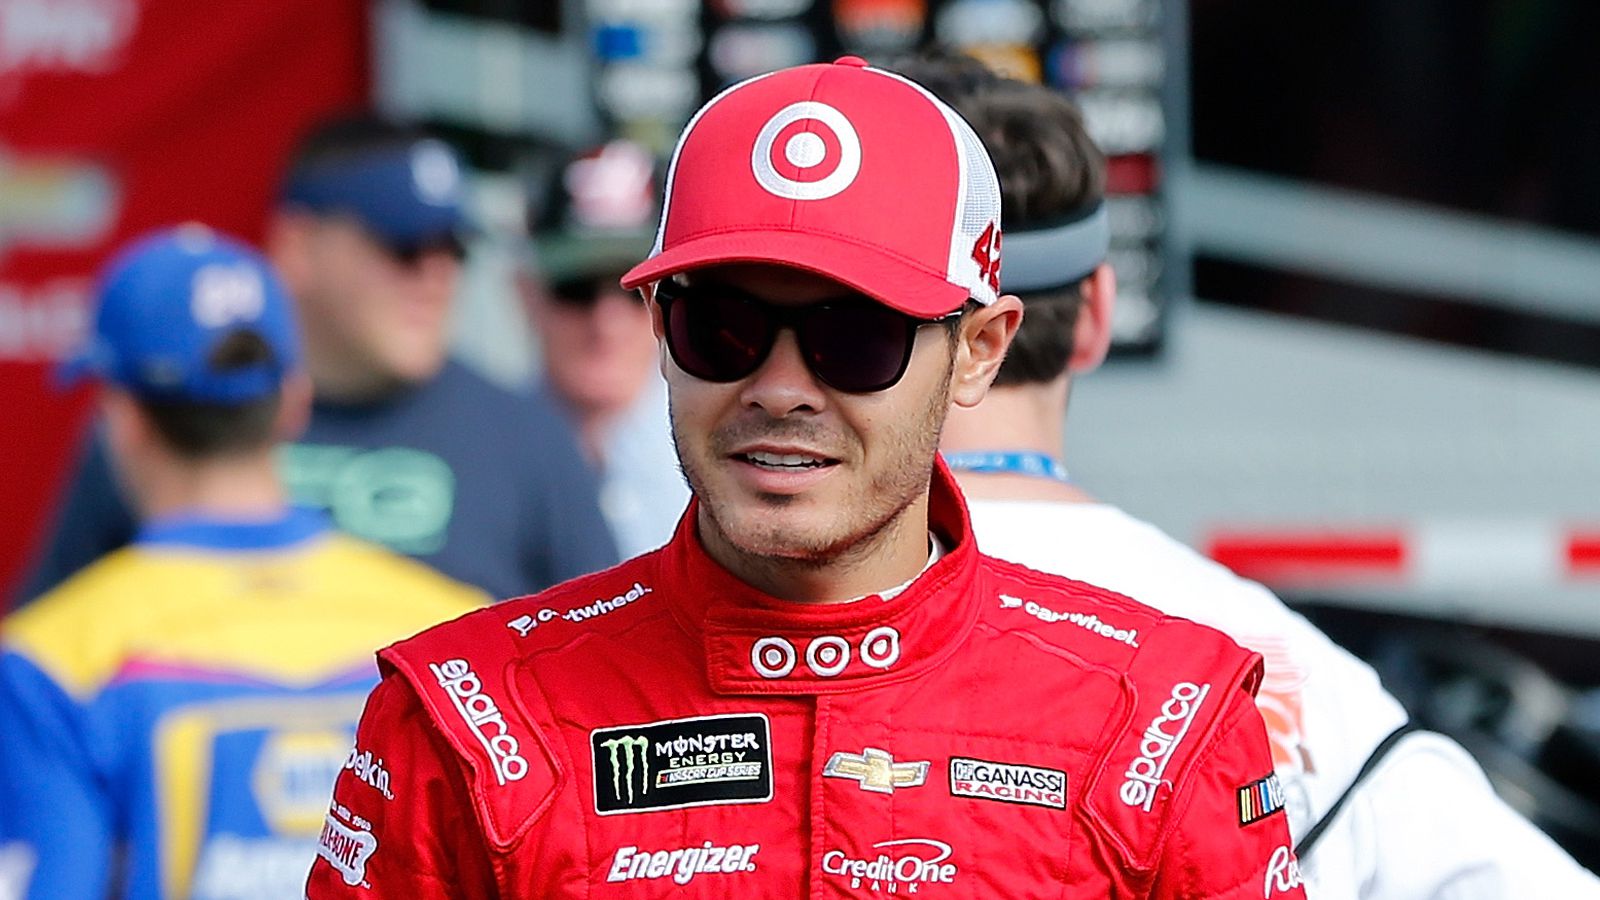 NASCAR penalized Kyle Larson 35 points, which drops the Chip Ganassi Racing...